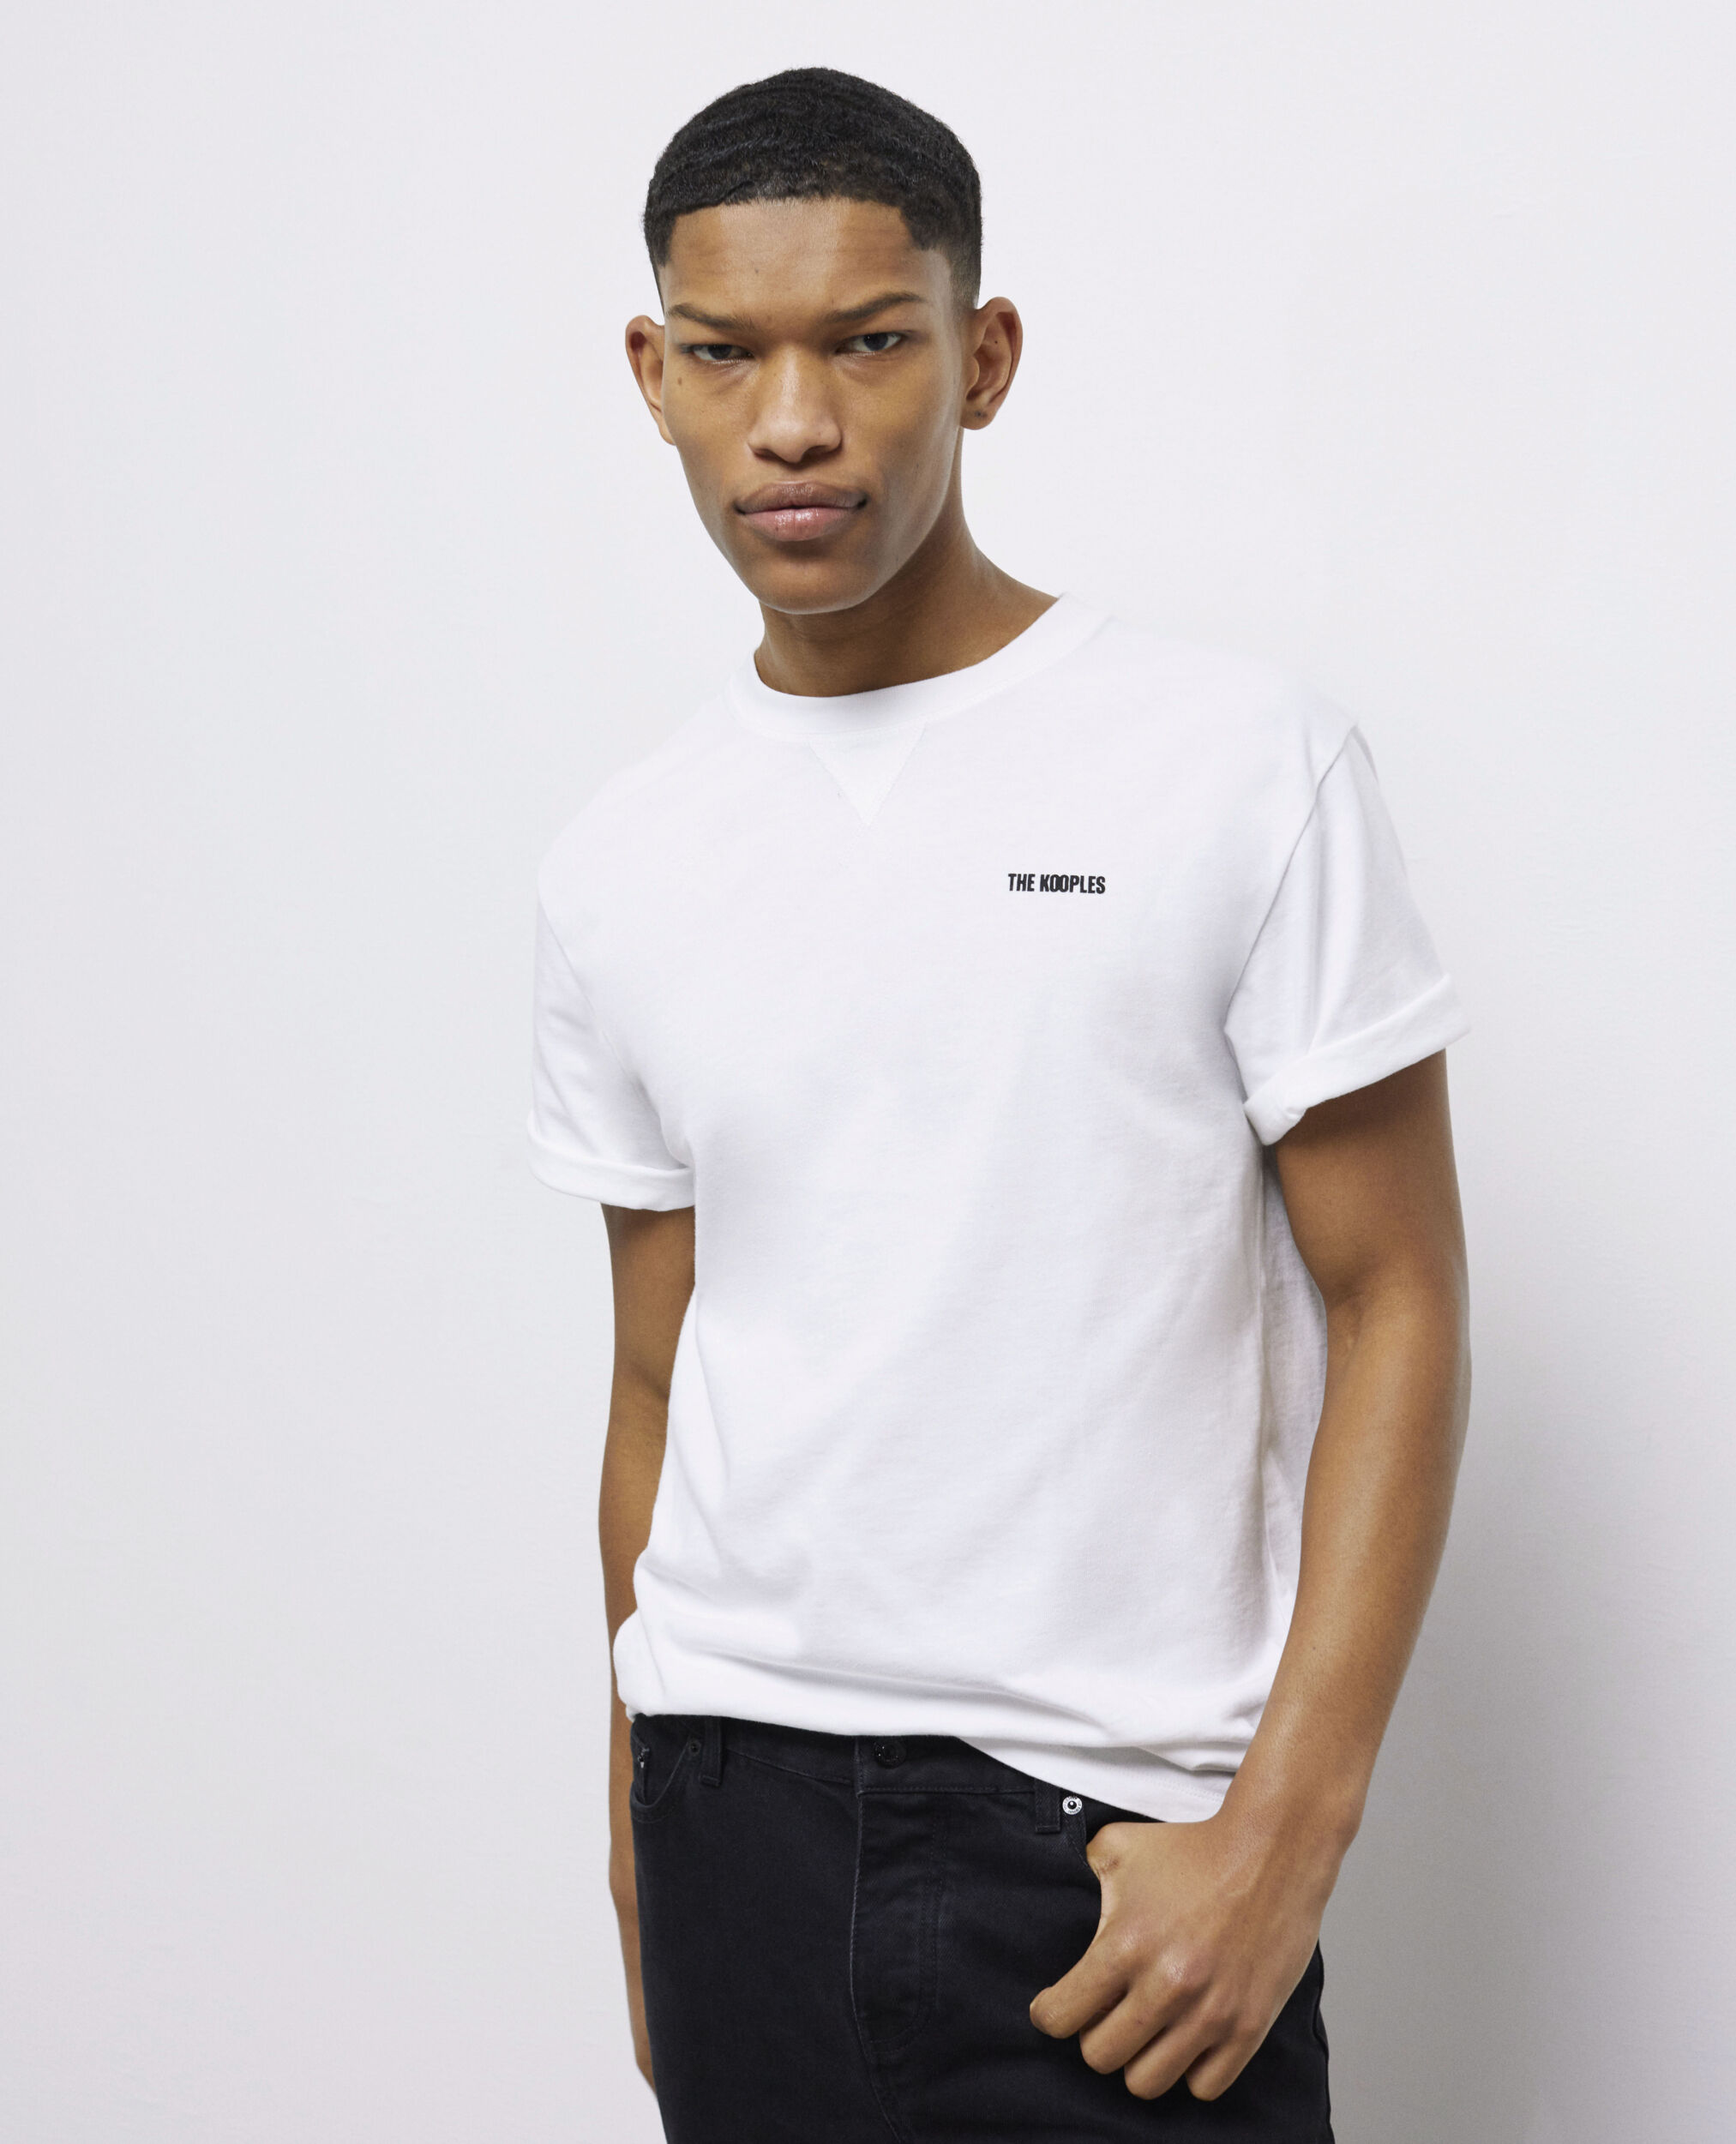 T-shirt Homme logo The Kooples blanc, WHITE, hi-res image number null